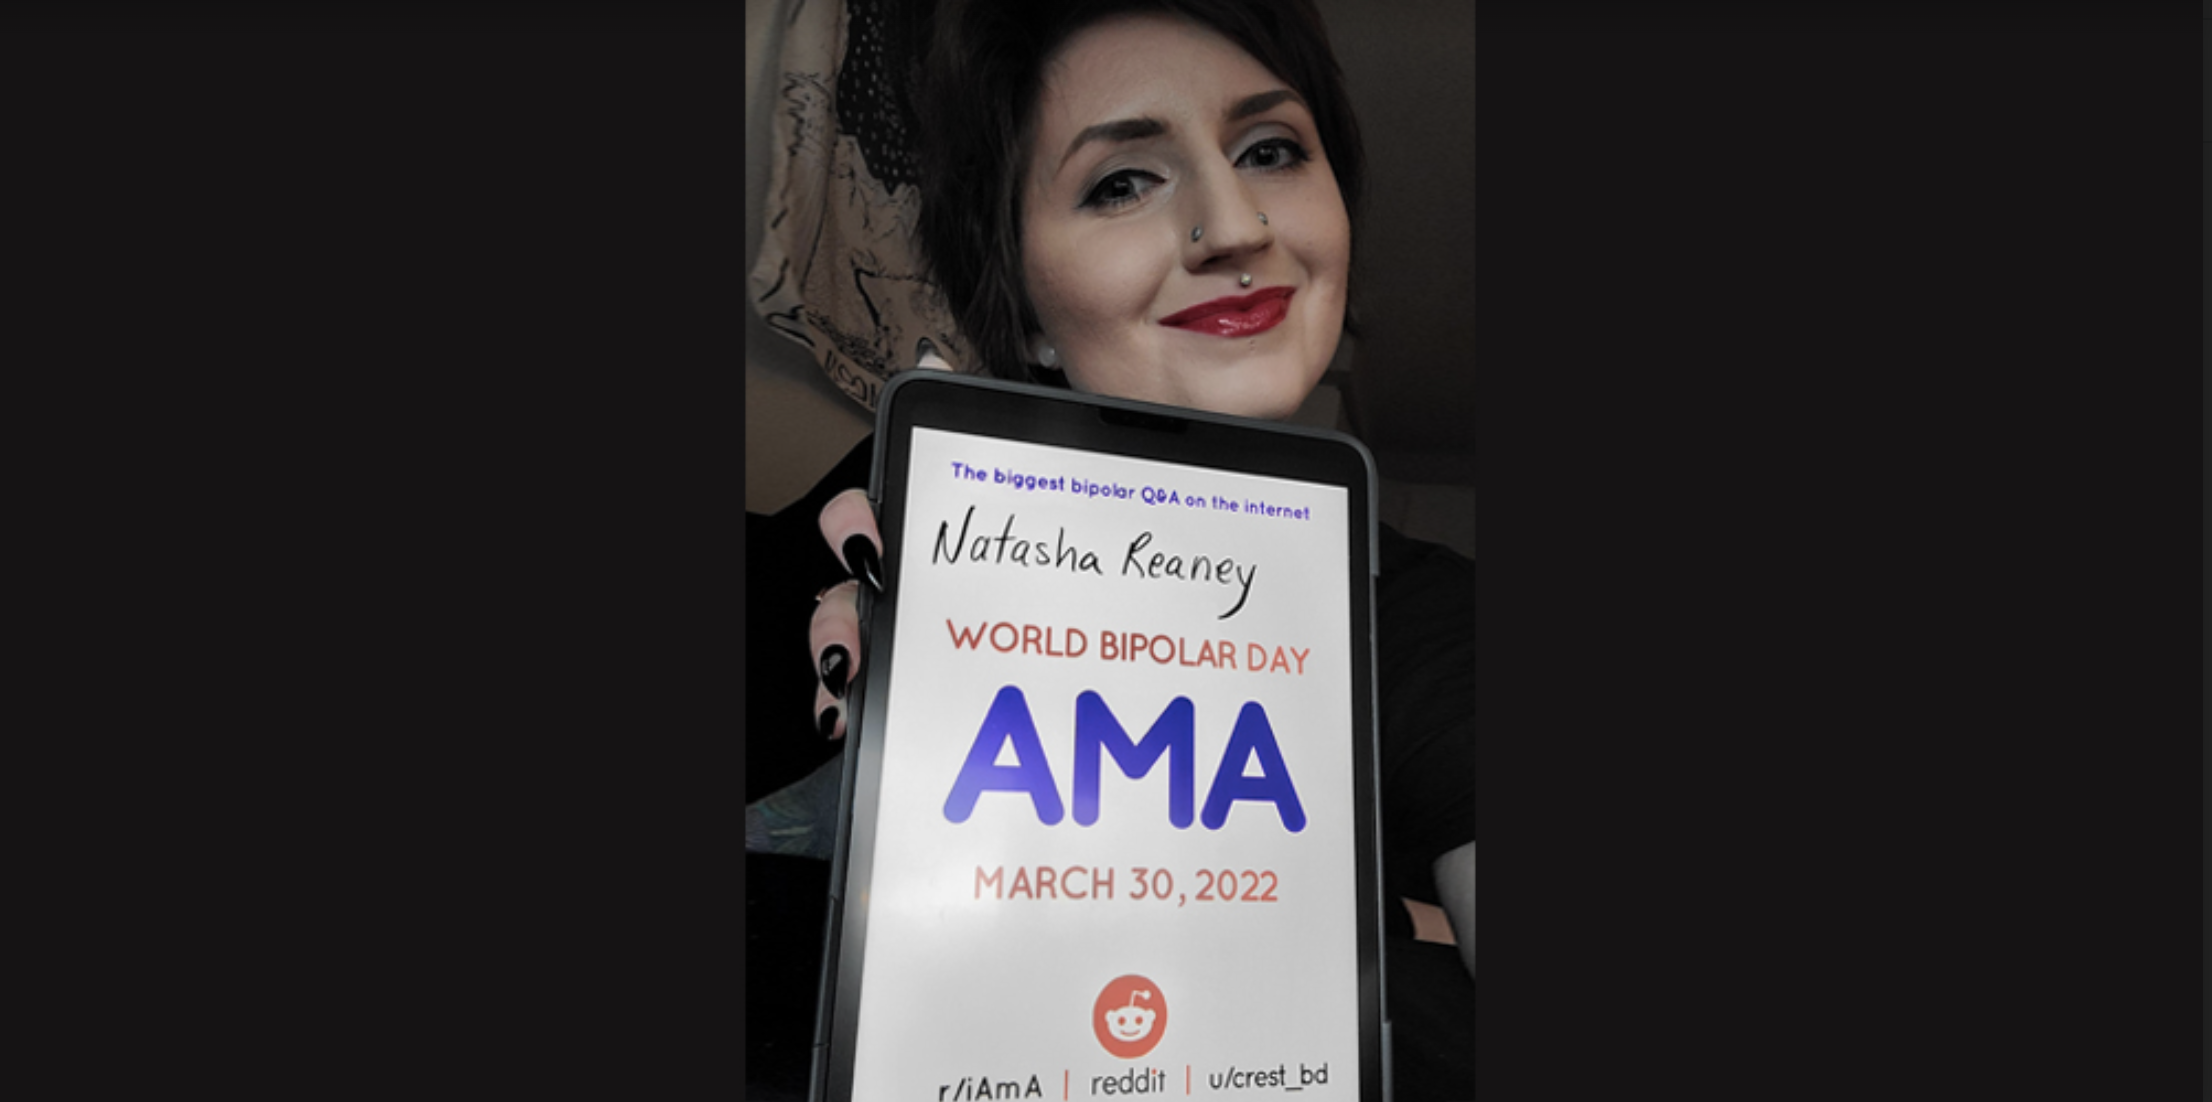 Natasha is taking a selfie. She has dark black hair, which is in a bun on the top of her head. In front of her is the AMA sign.